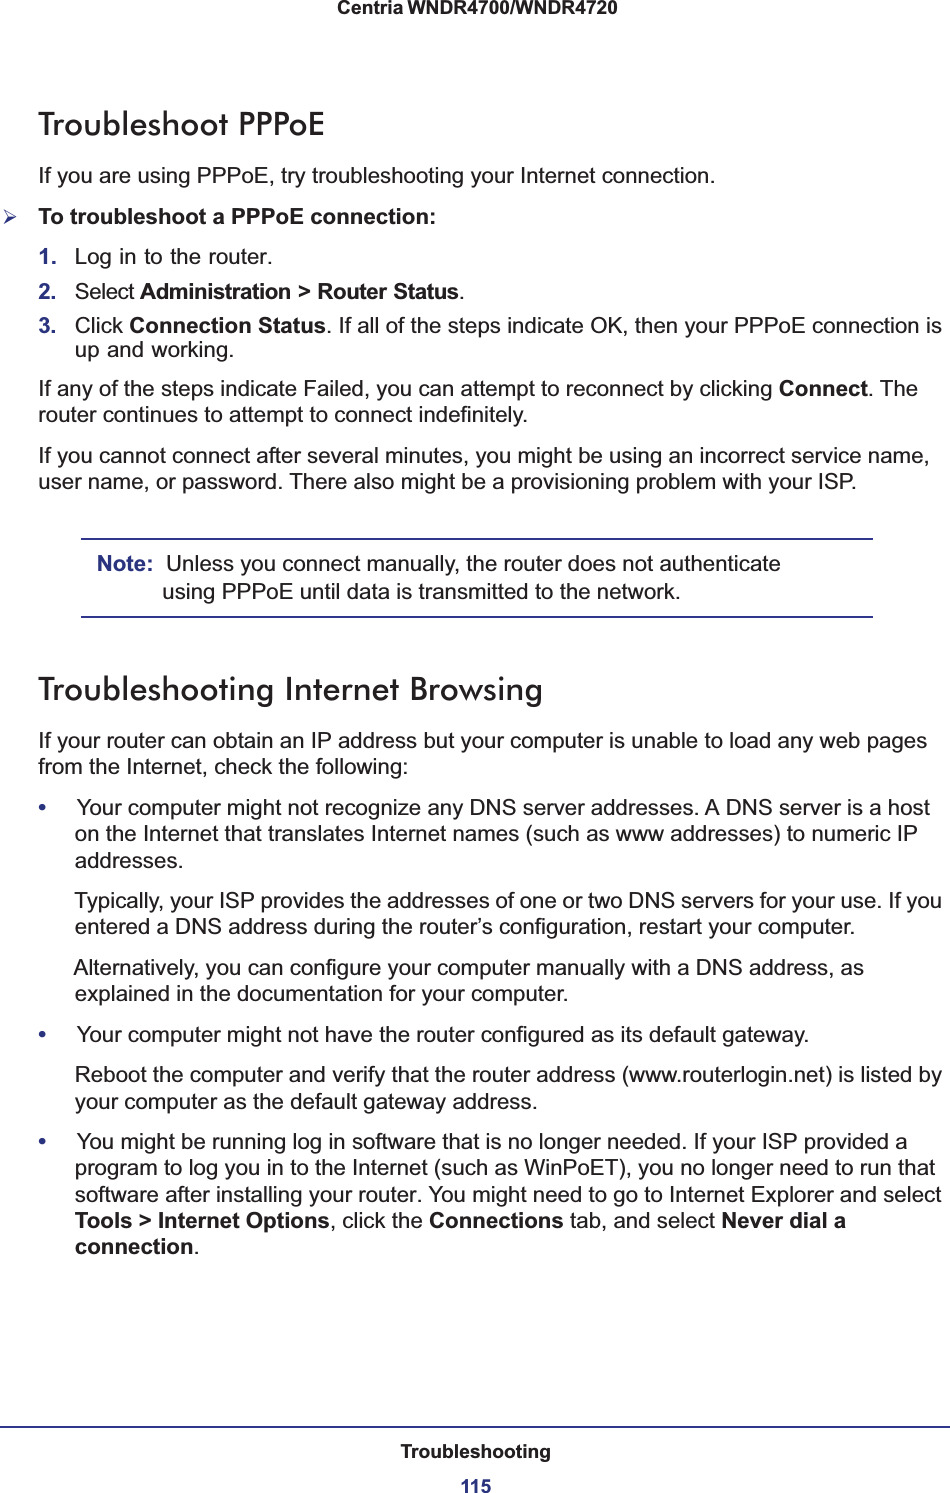 Troubleshooting115 Centria WNDR4700/WNDR4720Troubleshoot PPPoEIf you are using PPPoE, try troubleshooting your Internet connection.¾To troubleshoot a PPPoE connection:1. Log in to the router.2. Select Administration &gt; Router Status.3. Click Connection Status. If all of the steps indicate OK, then your PPPoE connection is up and working.If any of the steps indicate Failed, you can attempt to reconnect by clicking Connect. The router continues to attempt to connect indefinitely.If you cannot connect after several minutes, you might be using an incorrect service name, user name, or password. There also might be a provisioning problem with your ISP.Note: Unless you connect manually, the router does not authenticate using PPPoE until data is transmitted to the network.Troubleshooting Internet BrowsingIf your router can obtain an IP address but your computer is unable to load any web pages from the Internet, check the following:•Your computer might not recognize any DNS server addresses. A DNS server is a host on the Internet that translates Internet names (such as www addresses) to numeric IP addresses.Typically, your ISP provides the addresses of one or two DNS servers for your use. If you entered a DNS address during the router’s configuration, restart your computer.Alternatively, you can configure your computer manually with a DNS address, as explained in the documentation for your computer.•Your computer might not have the router configured as its default gateway.Reboot the computer and verify that the router address (www.routerlogin.net) is listed by your computer as the default gateway address.•You might be running log in software that is no longer needed. If your ISP provided a program to log you in to the Internet (such as WinPoET), you no longer need to run that software after installing your router. You might need to go to Internet Explorer and select Tools &gt; Internet Options, click the Connections tab, and select Never dial a connection.